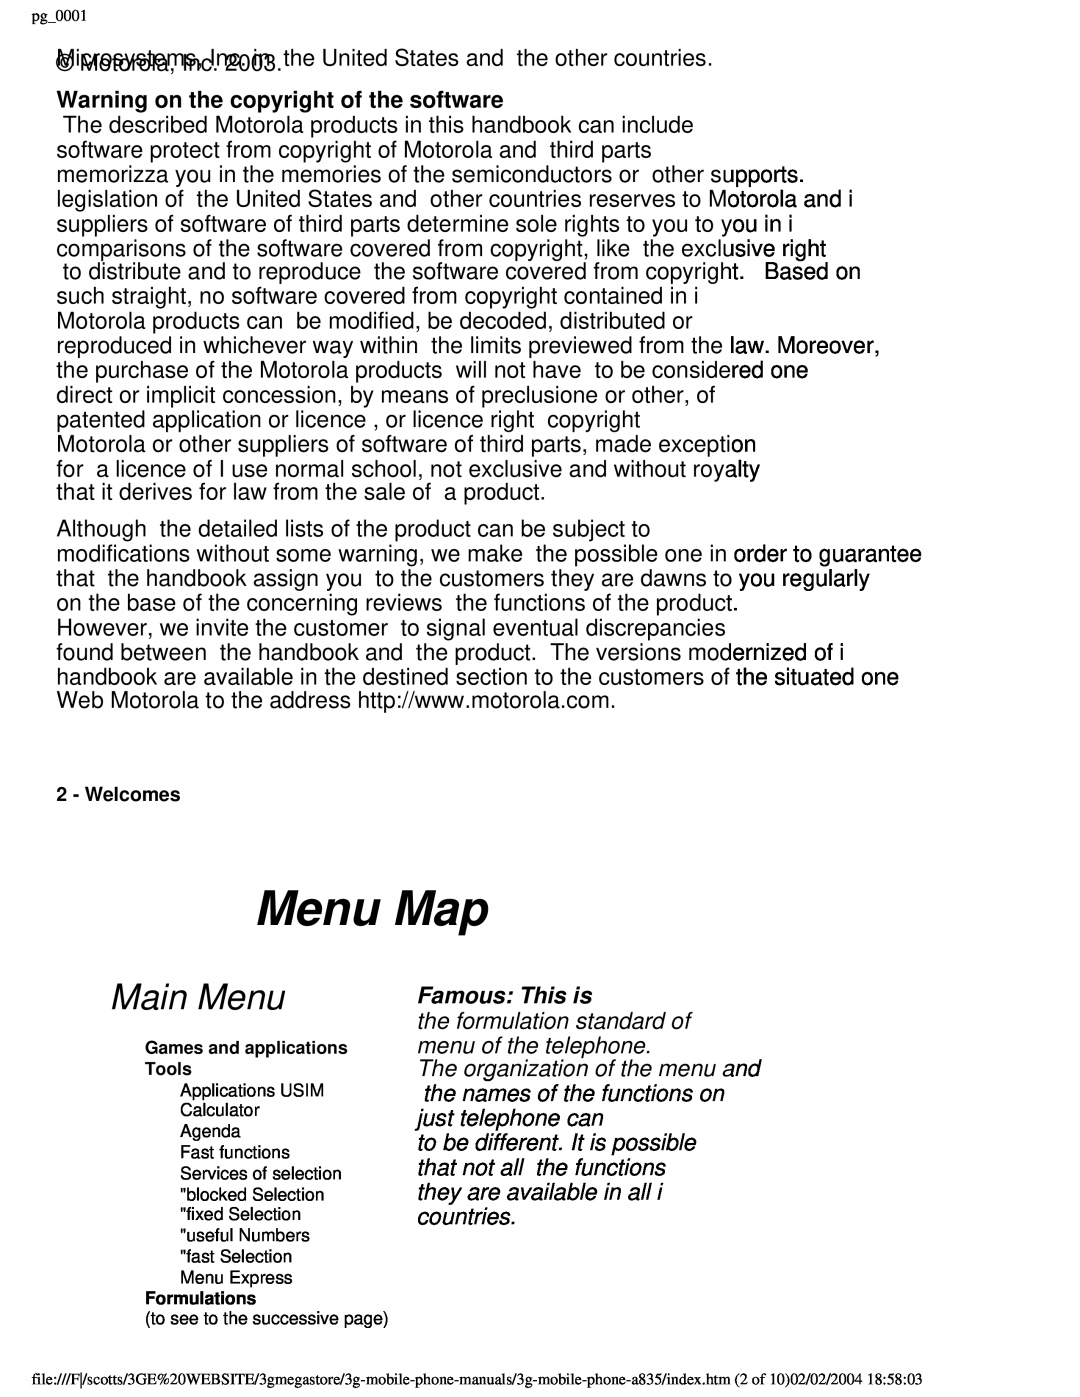 Motorola PG_0001 Main Menu, Warning on the copyright of the software, Famous This is, Menu Map, menu of the telephone 